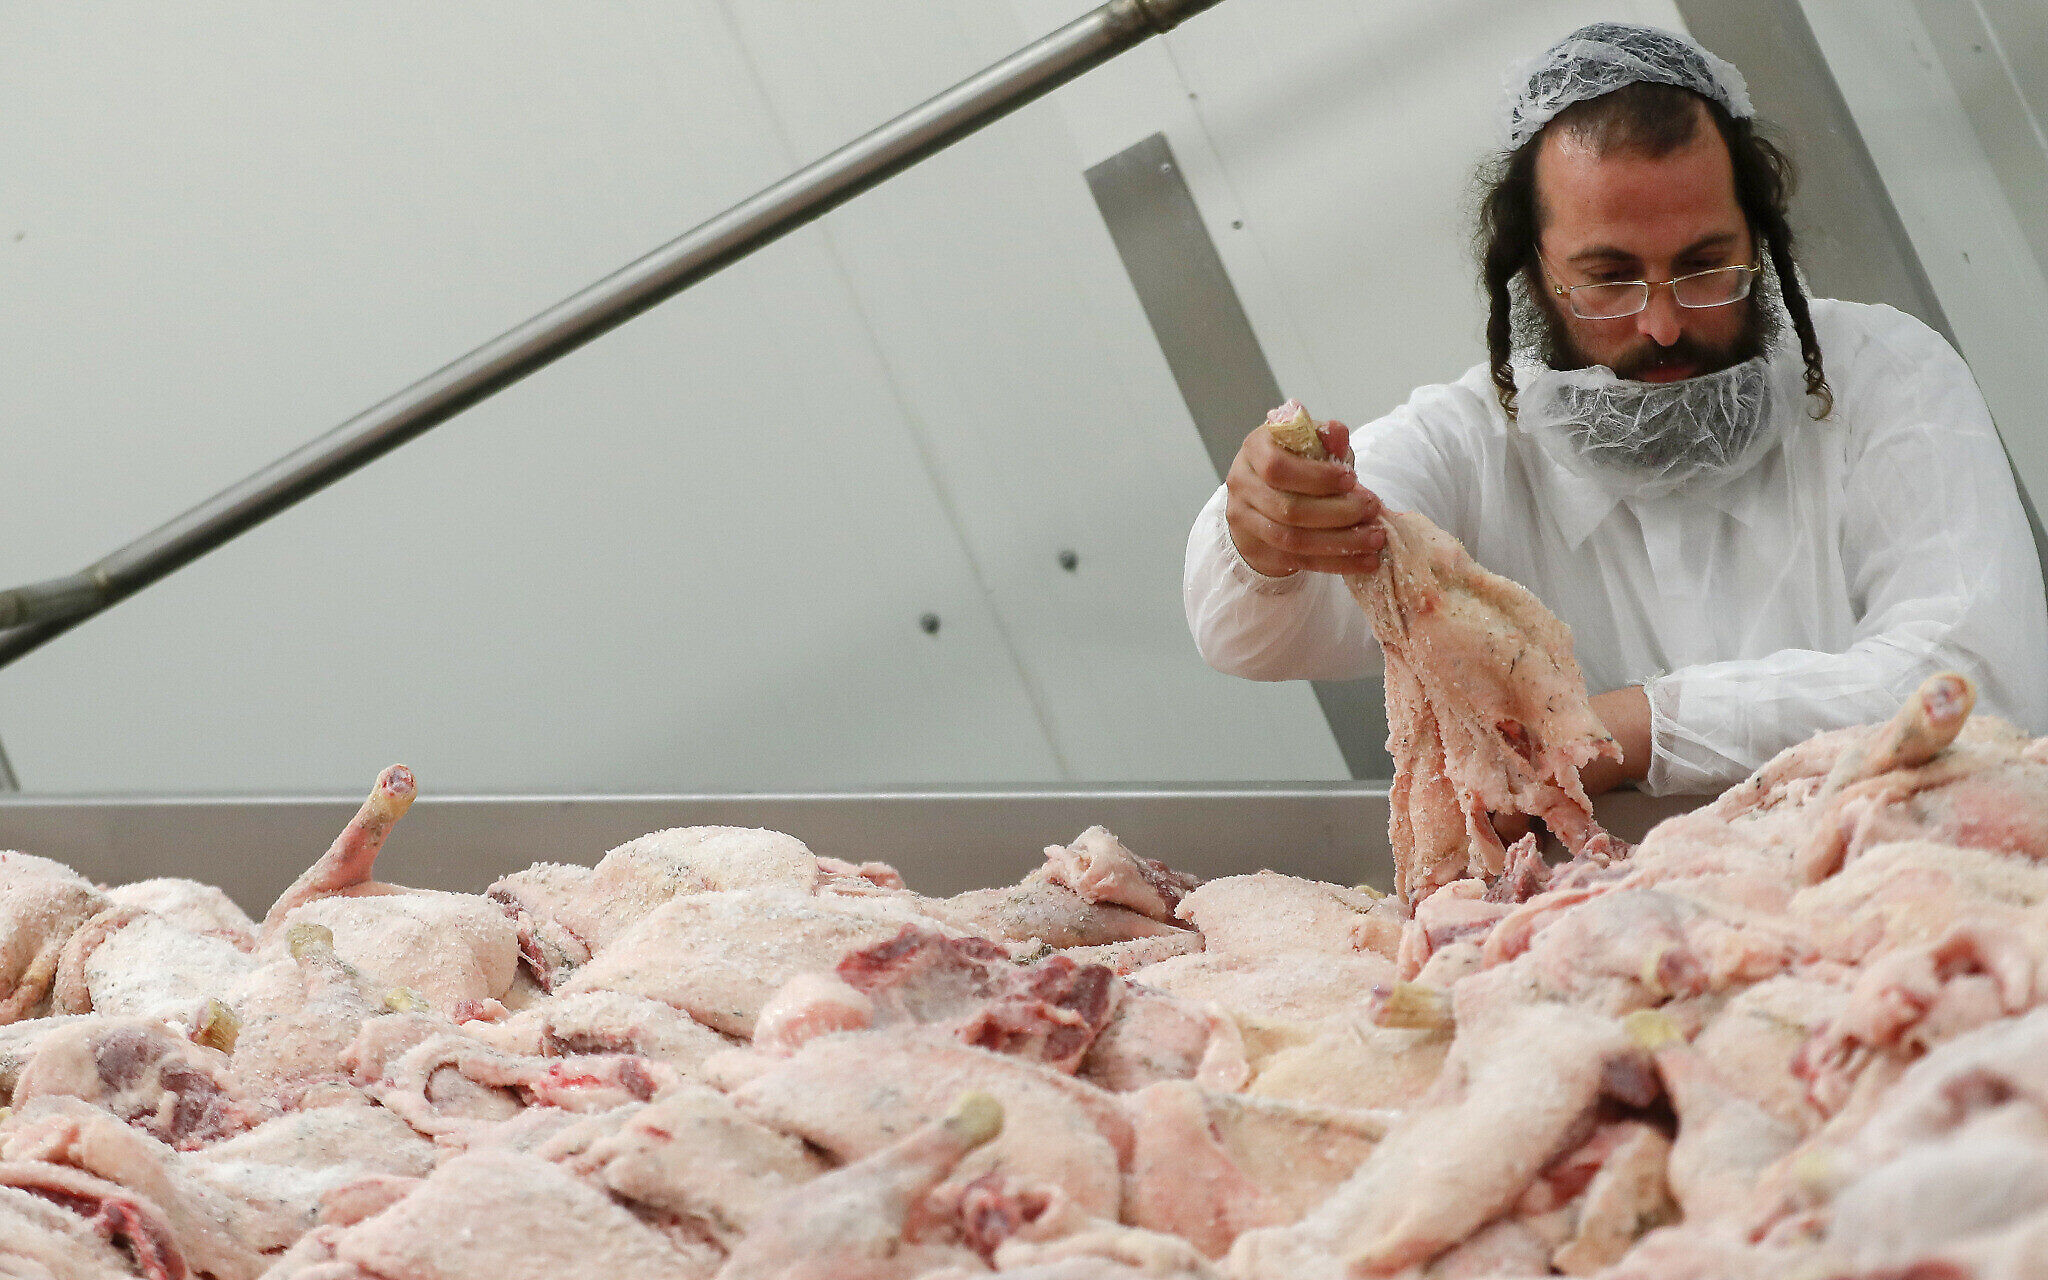 European court ruling brings kosher slaughterhouse new business amid old fears | The Times of Israel